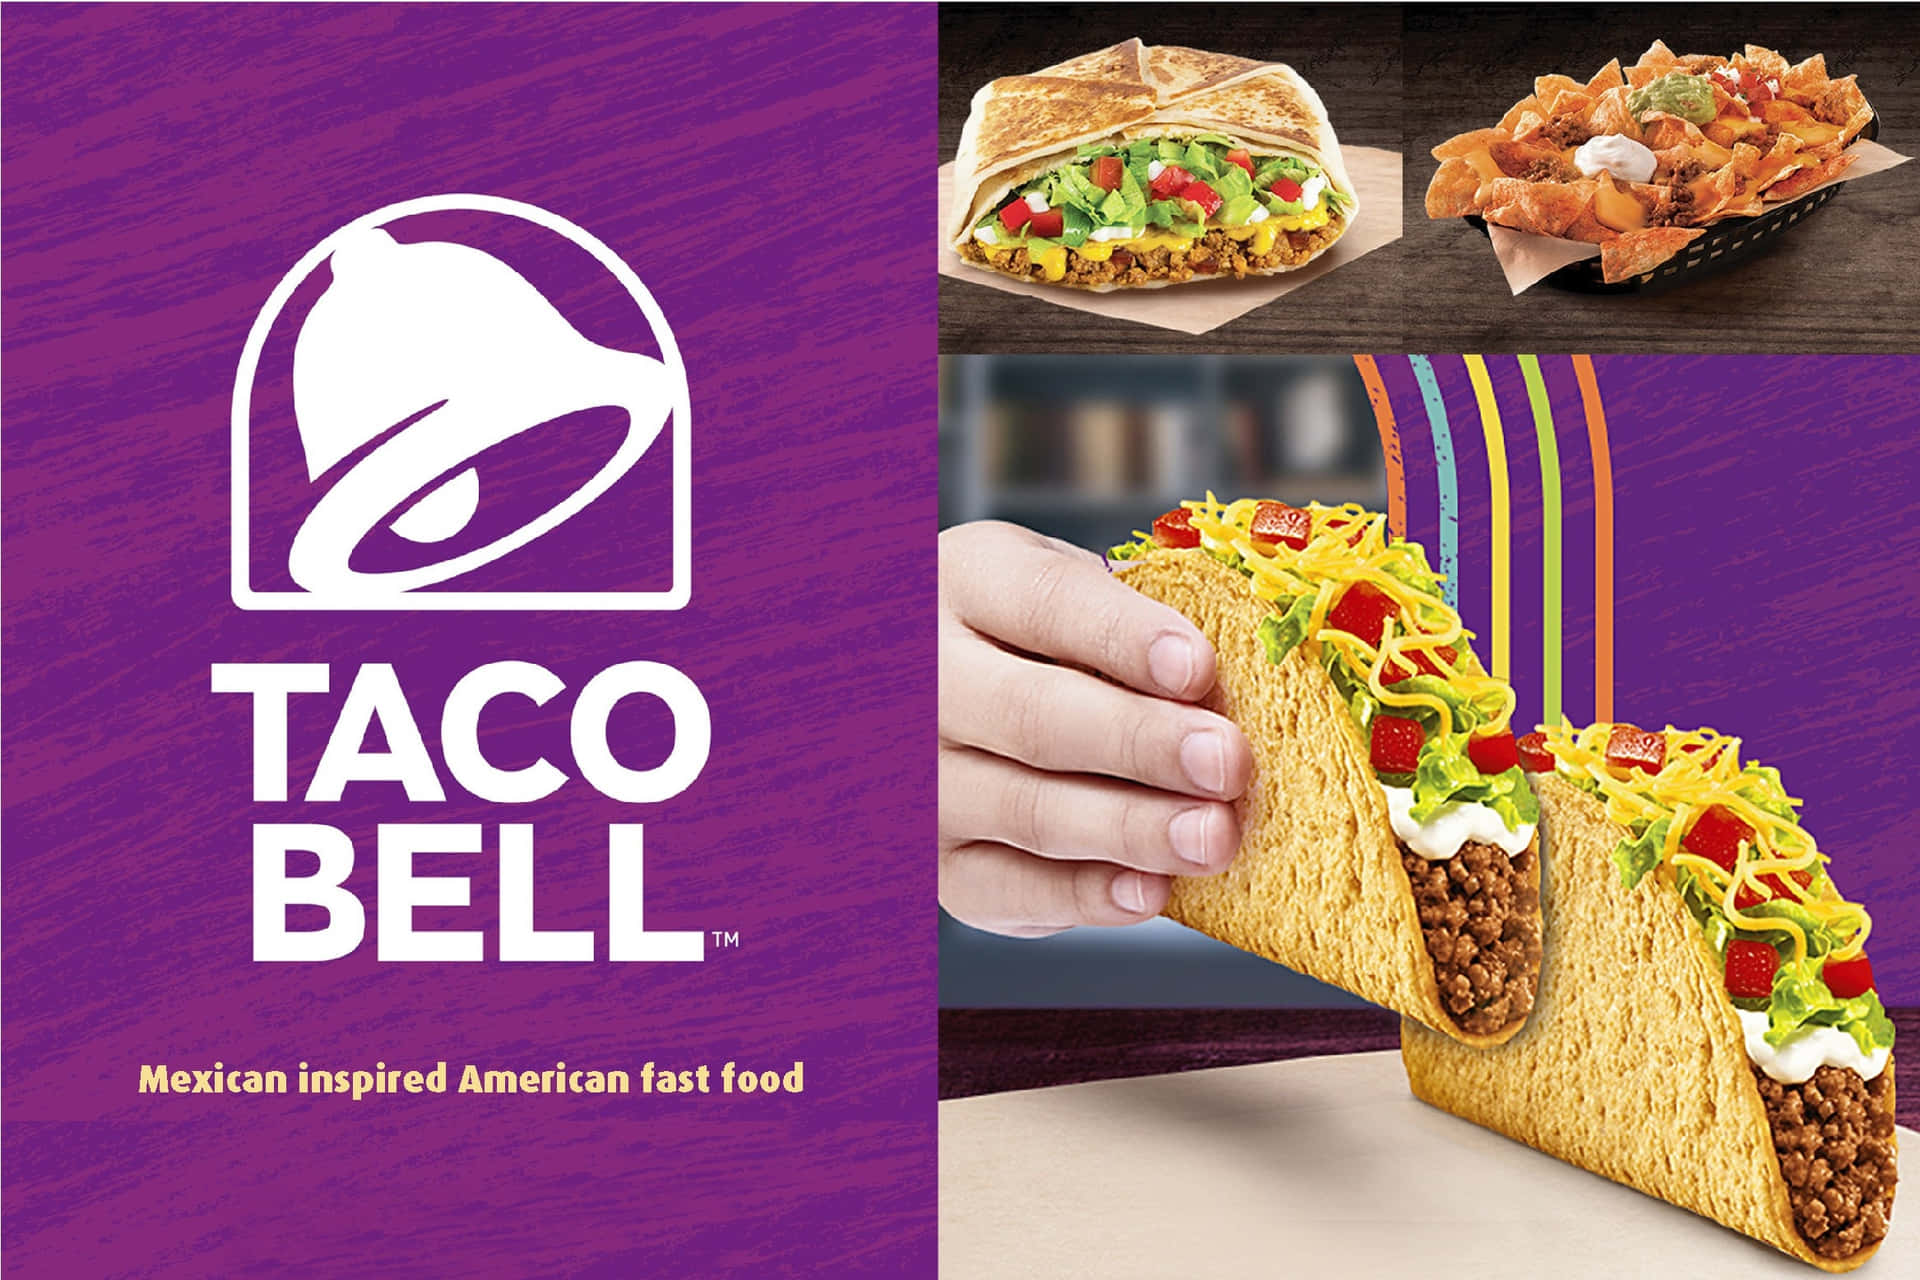 Taco Bell - Ad For The Company